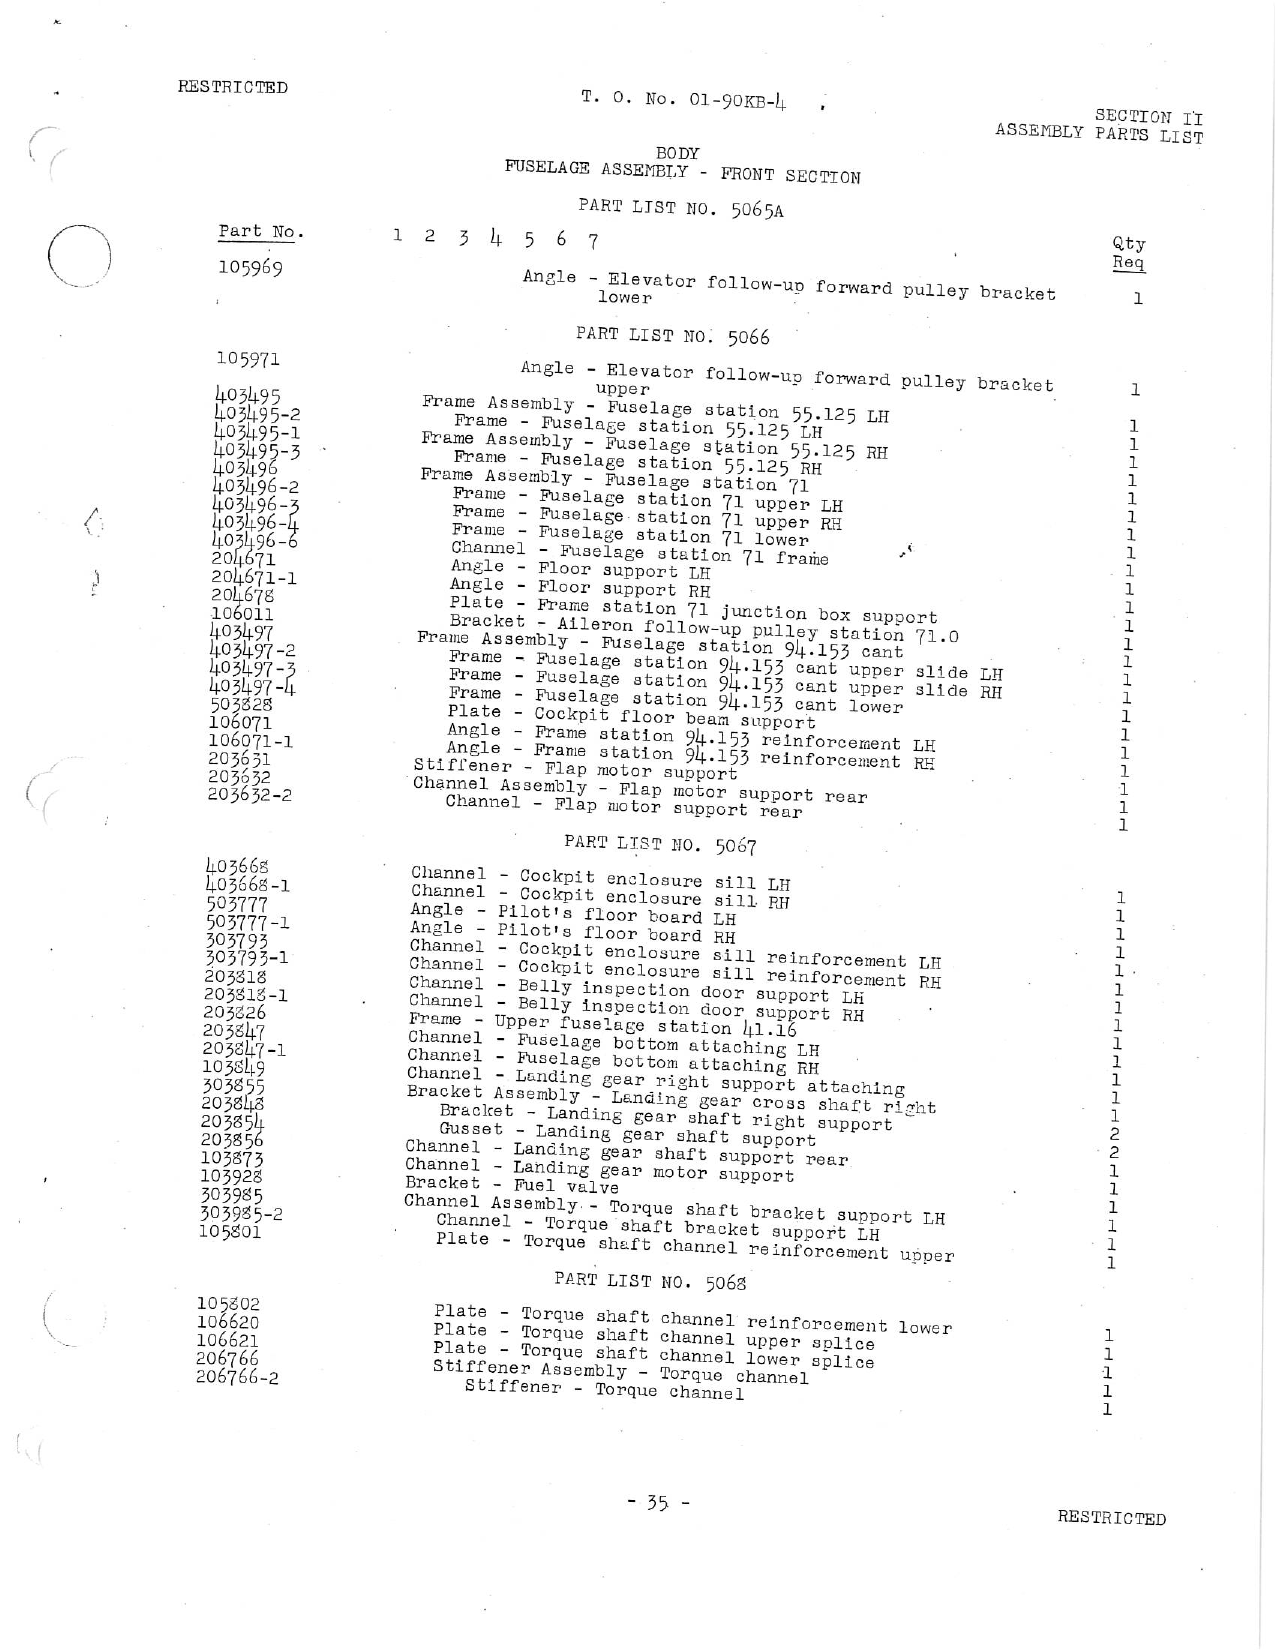 Sample page 38 from AirCorps Library document: Parts Catalog: AT-10